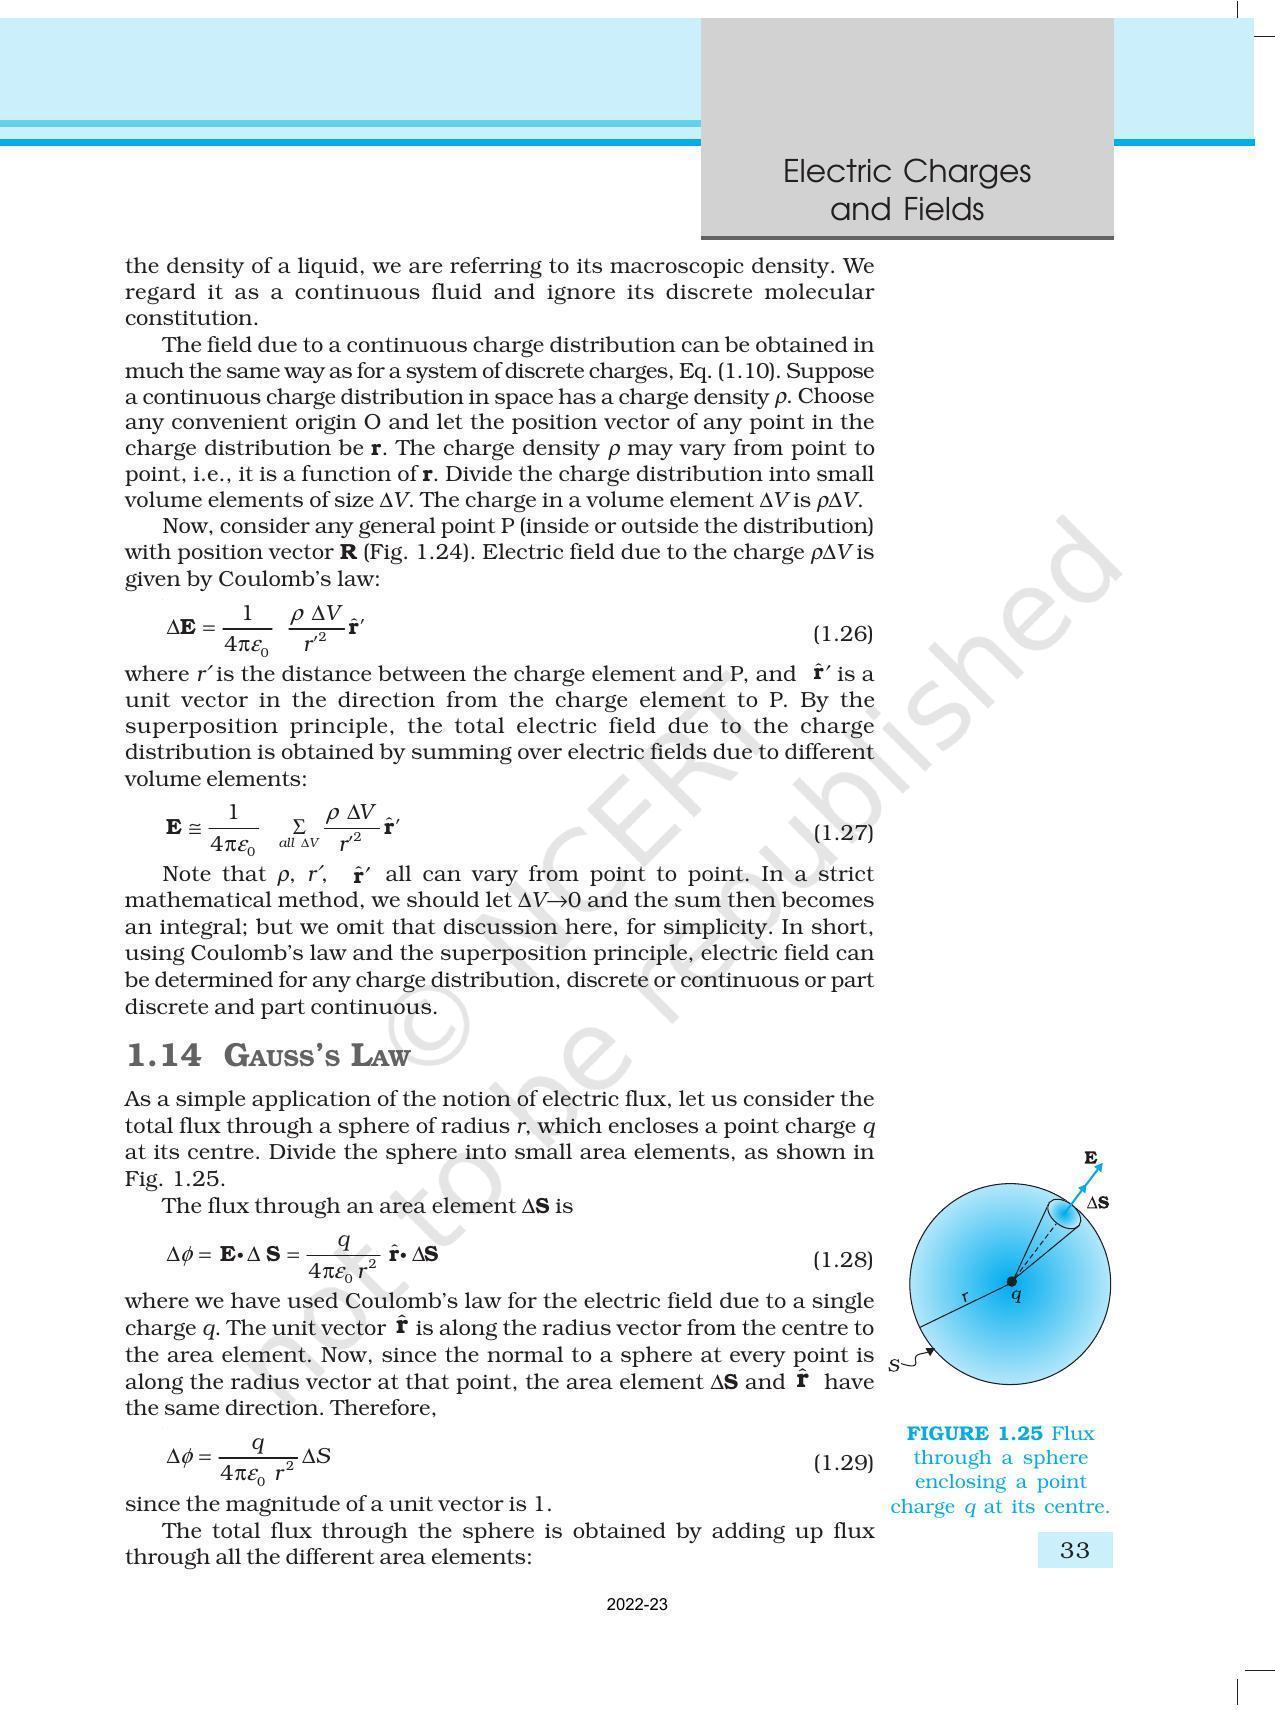 NCERT Book for Class 12 Physics Chapter 1 Electric Charges and Fields - Page 33